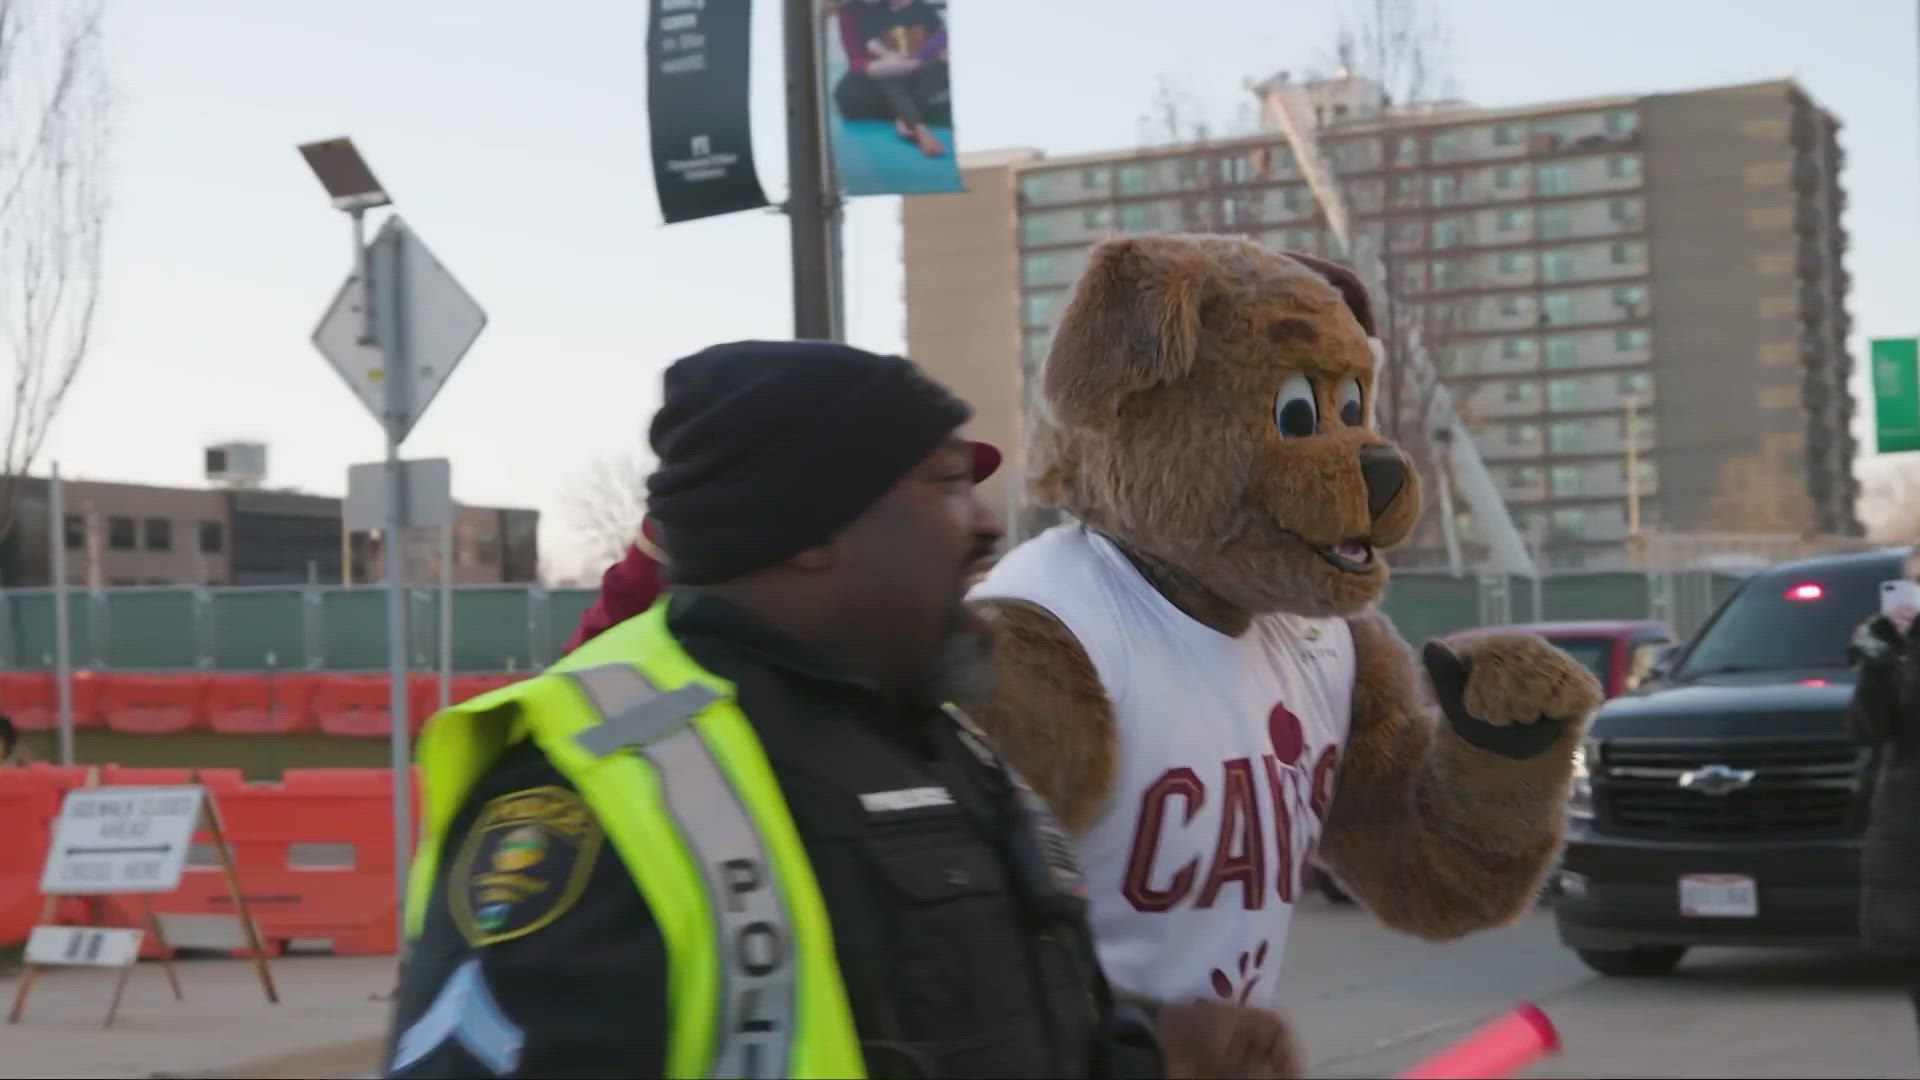 Corporal Eric Hudson was joined by Ahmaad Crump and Moondog ahead of Saturday's Game 1 against the New York Knicks.